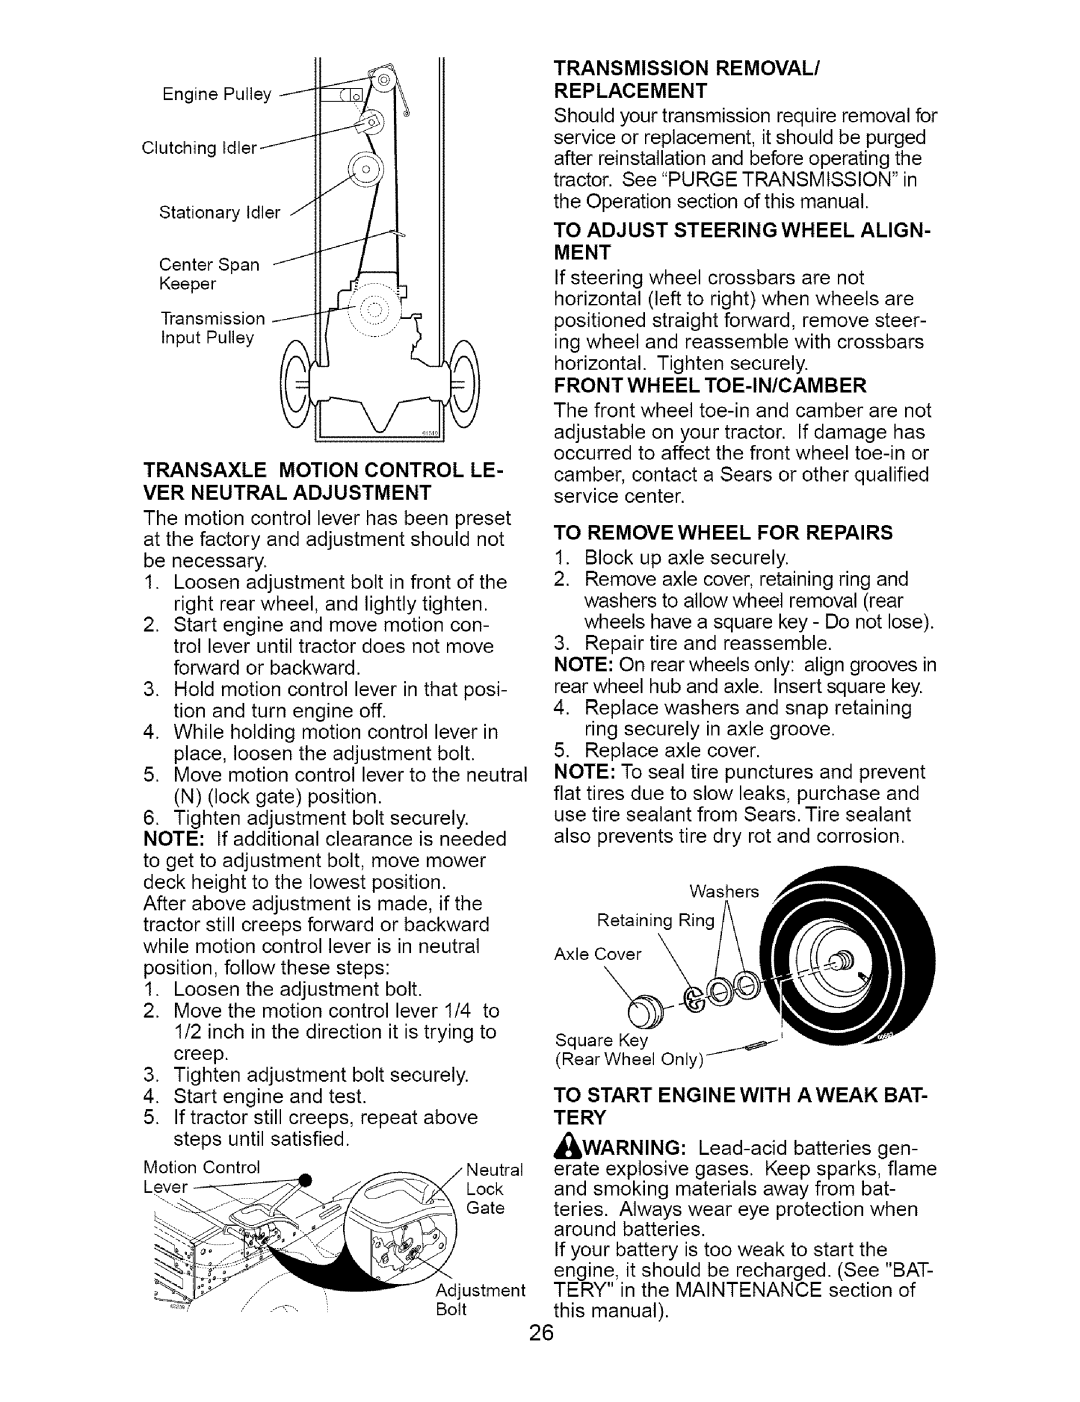 Craftsman 917.274762 Transaxle Motion Control Le, Ver Neutral Adjustment, Transmission Removal Replacement, Ment 